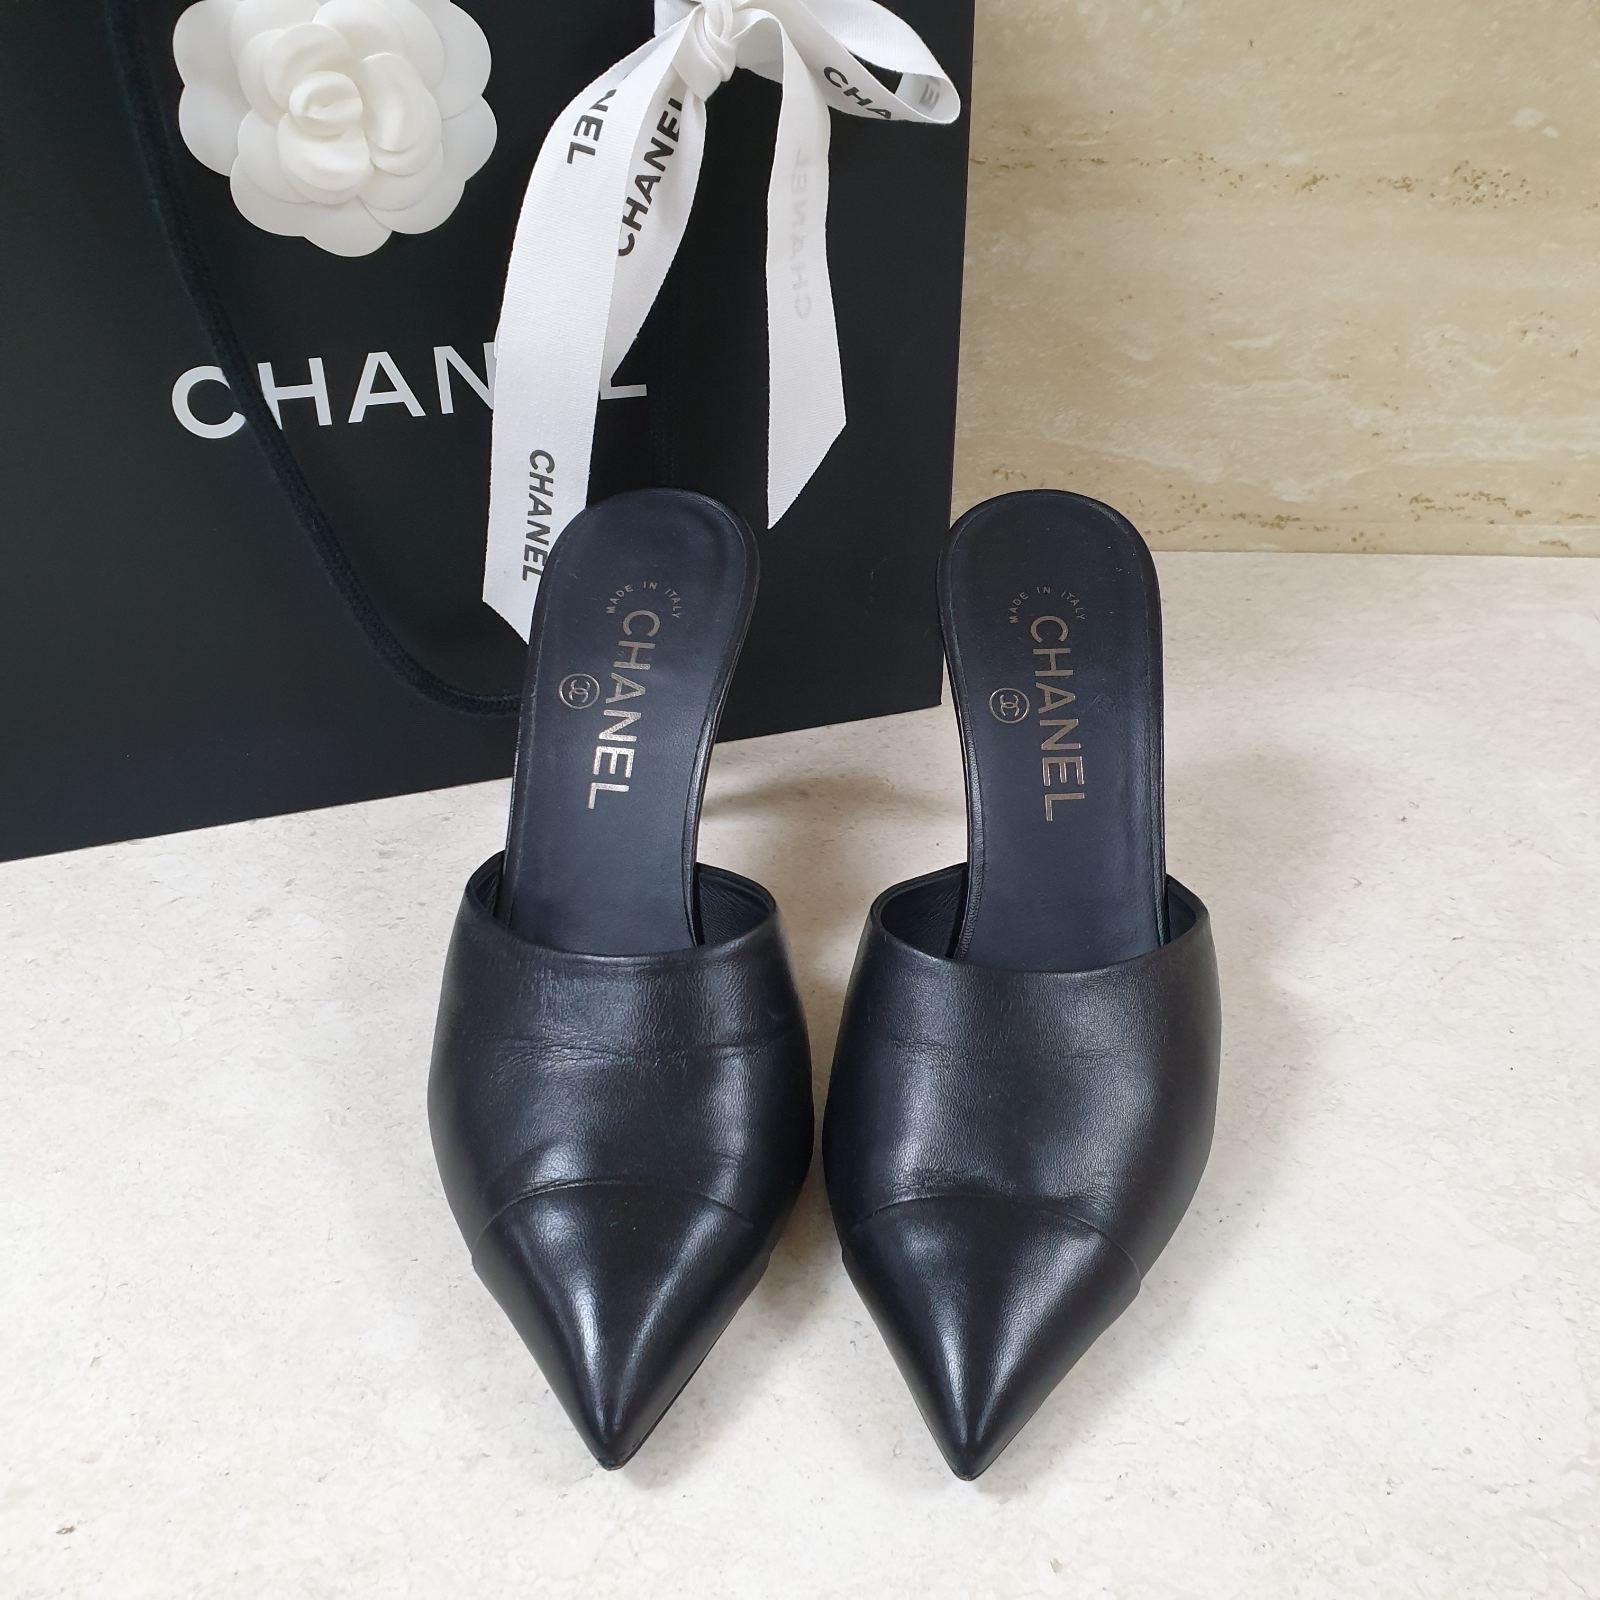 Chanel Leather Mules
From the 2016 Collection
Black
Interlocking CC Logo & Faux Pearl Accents
Pointed-Toes
Stiletto Heels
Sz.38
Good condition.
No box. No dust bag